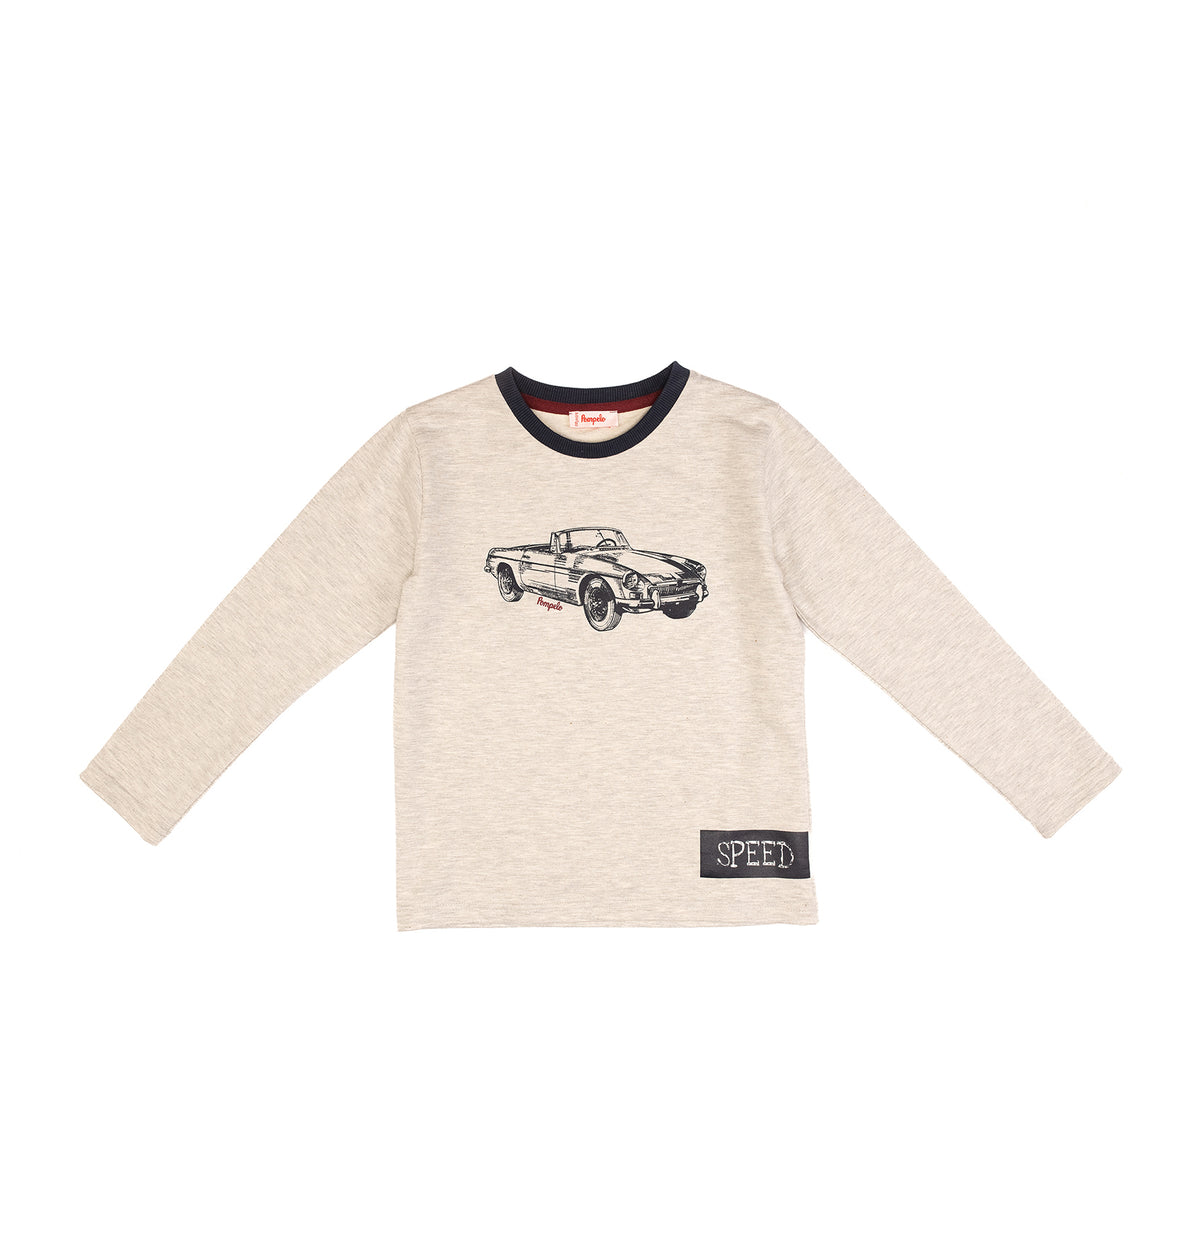 Fashionable car printed sweat shirt for boys by Pompelo